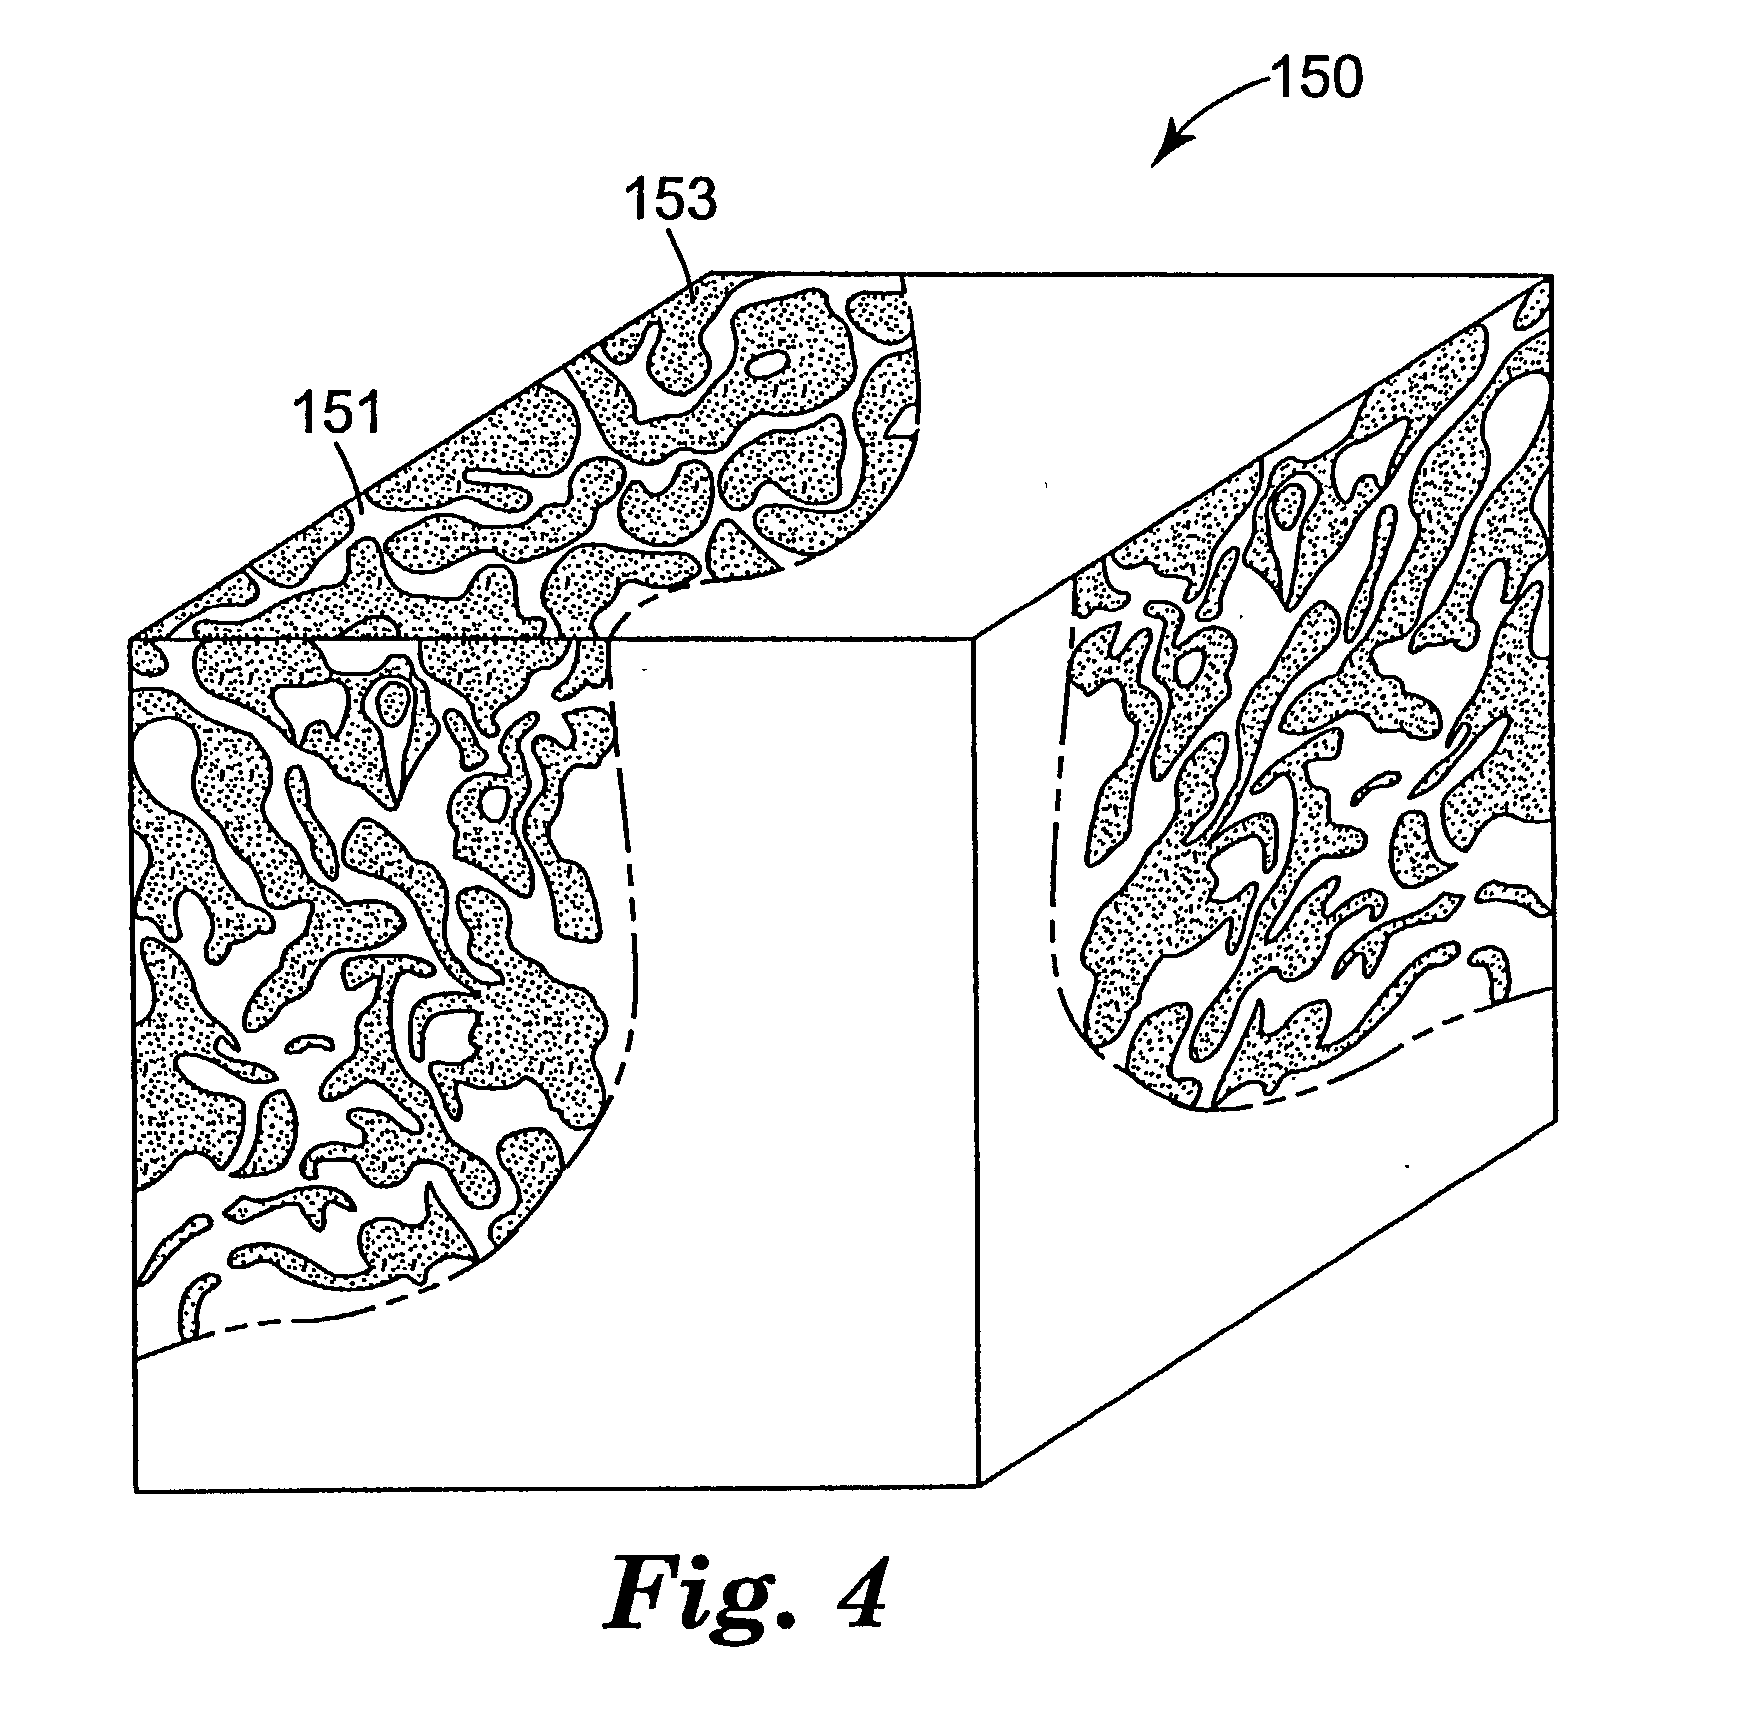 Fused abrasive particles, abrasive articles, and methods of making and using the same